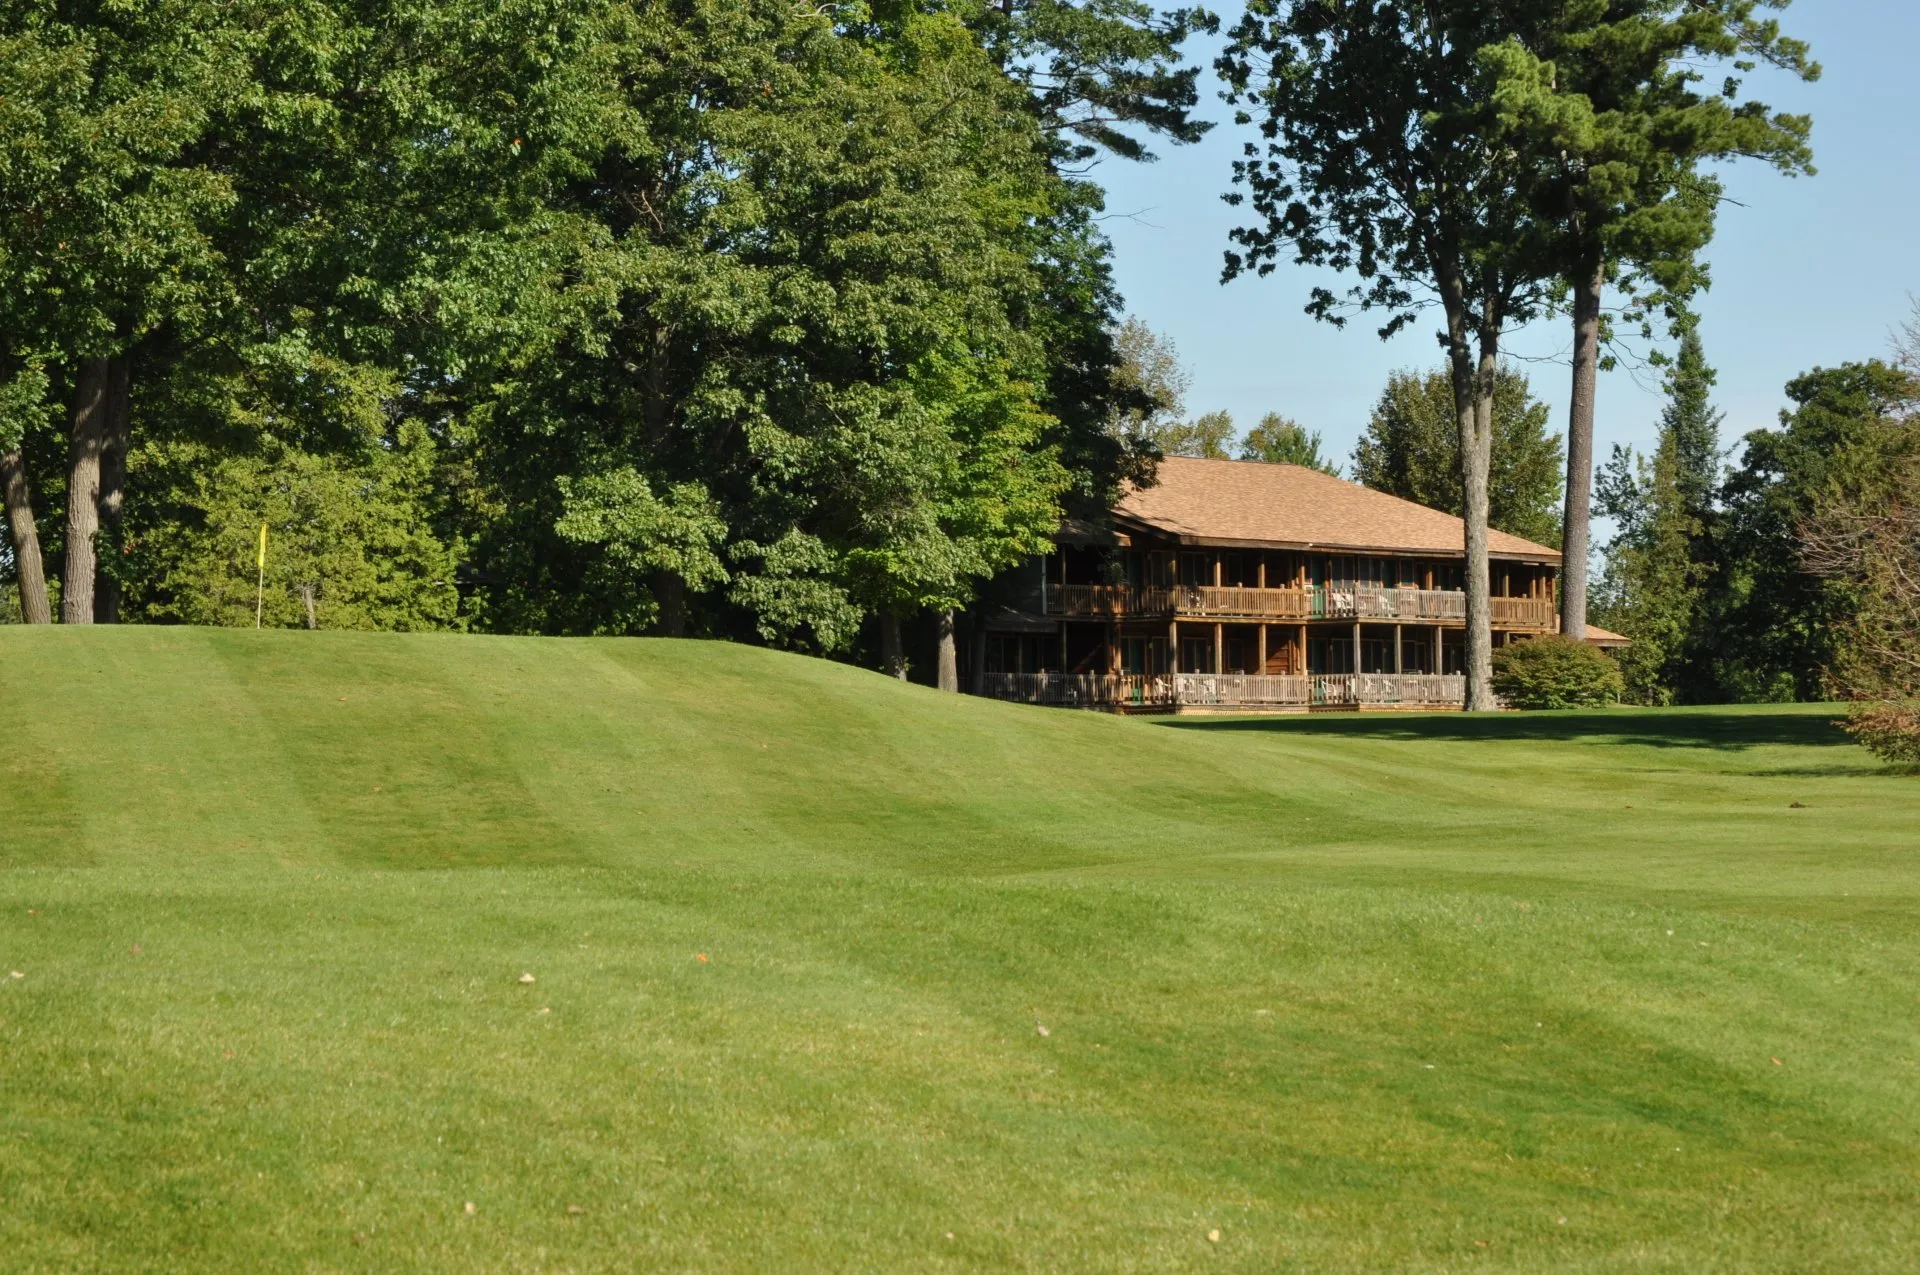 Lodging overlooking the golf course